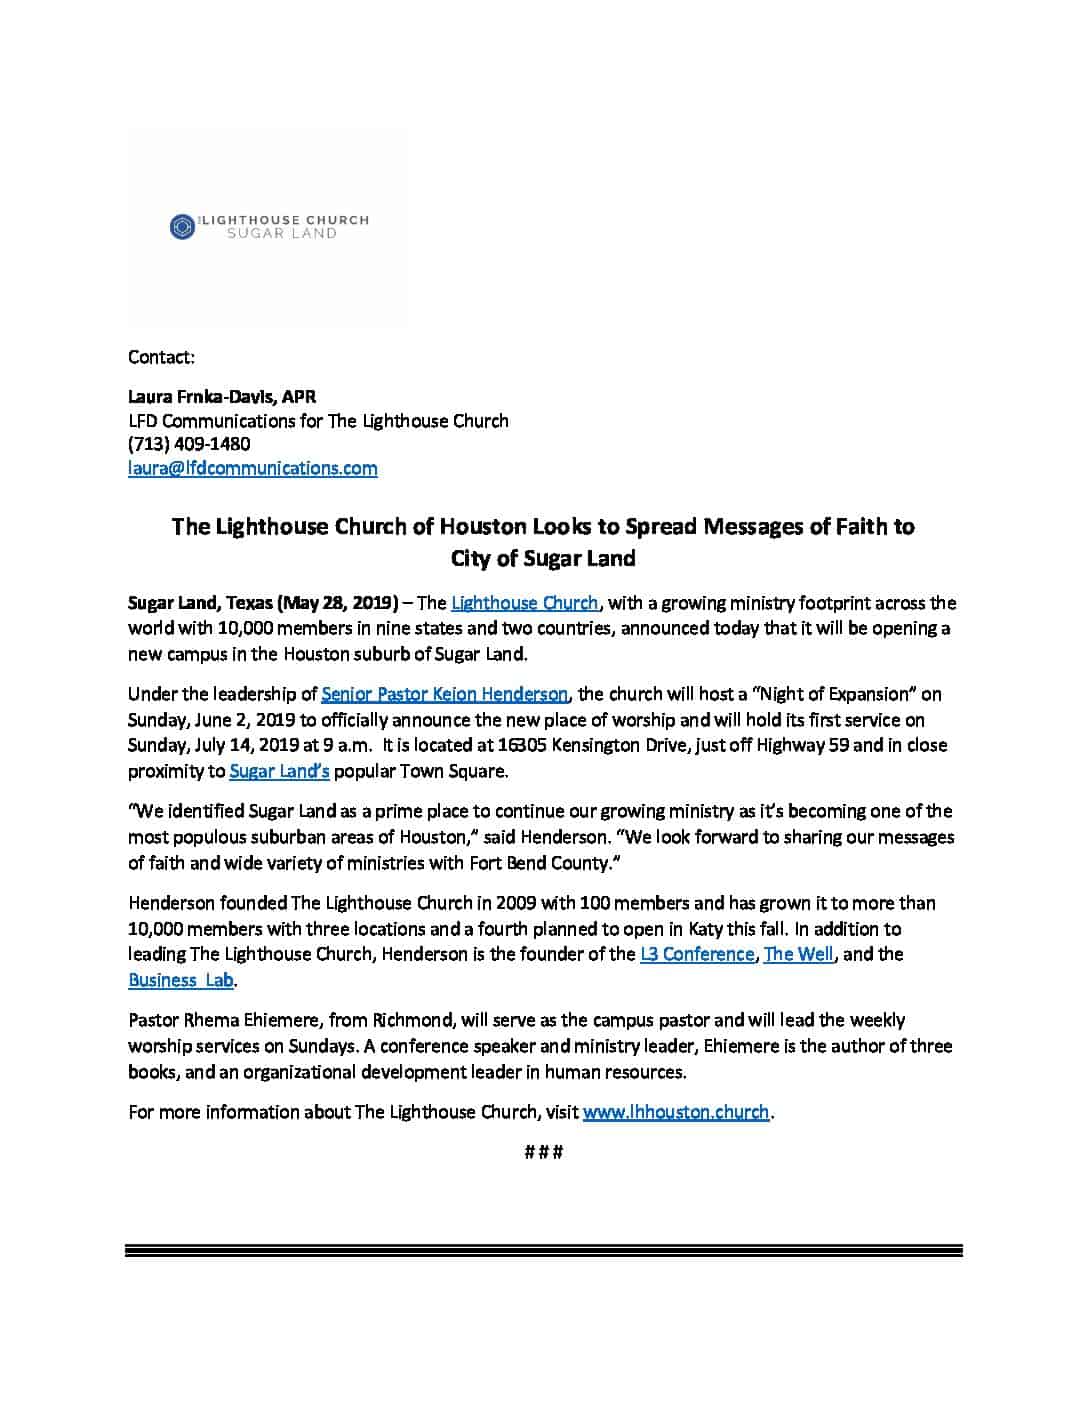 Lighthouse Church of Houston Press Release